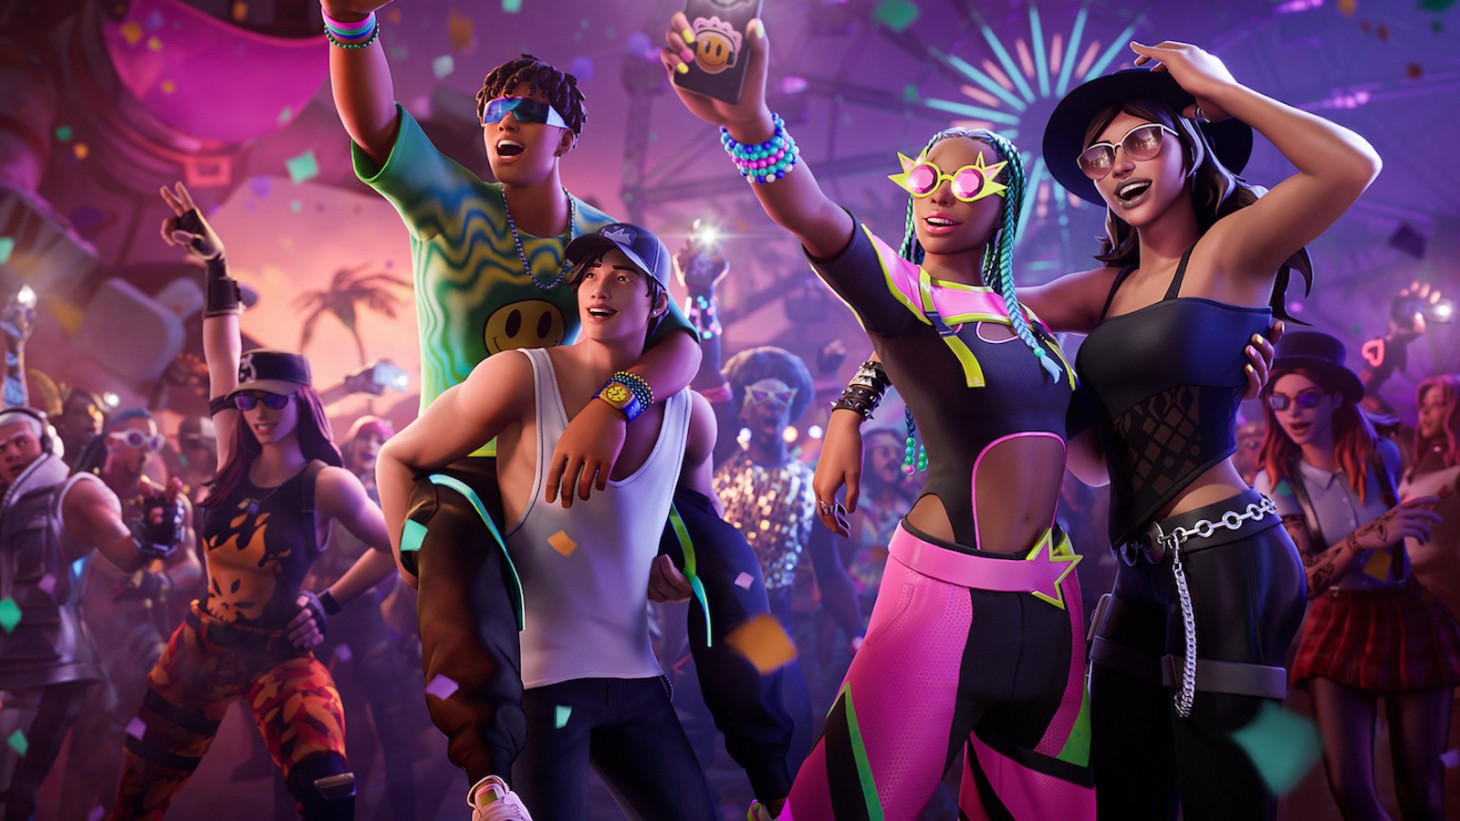 Fortnite: New Coachella Collaboration Brings Music, Cosmetics, And More Starting Today